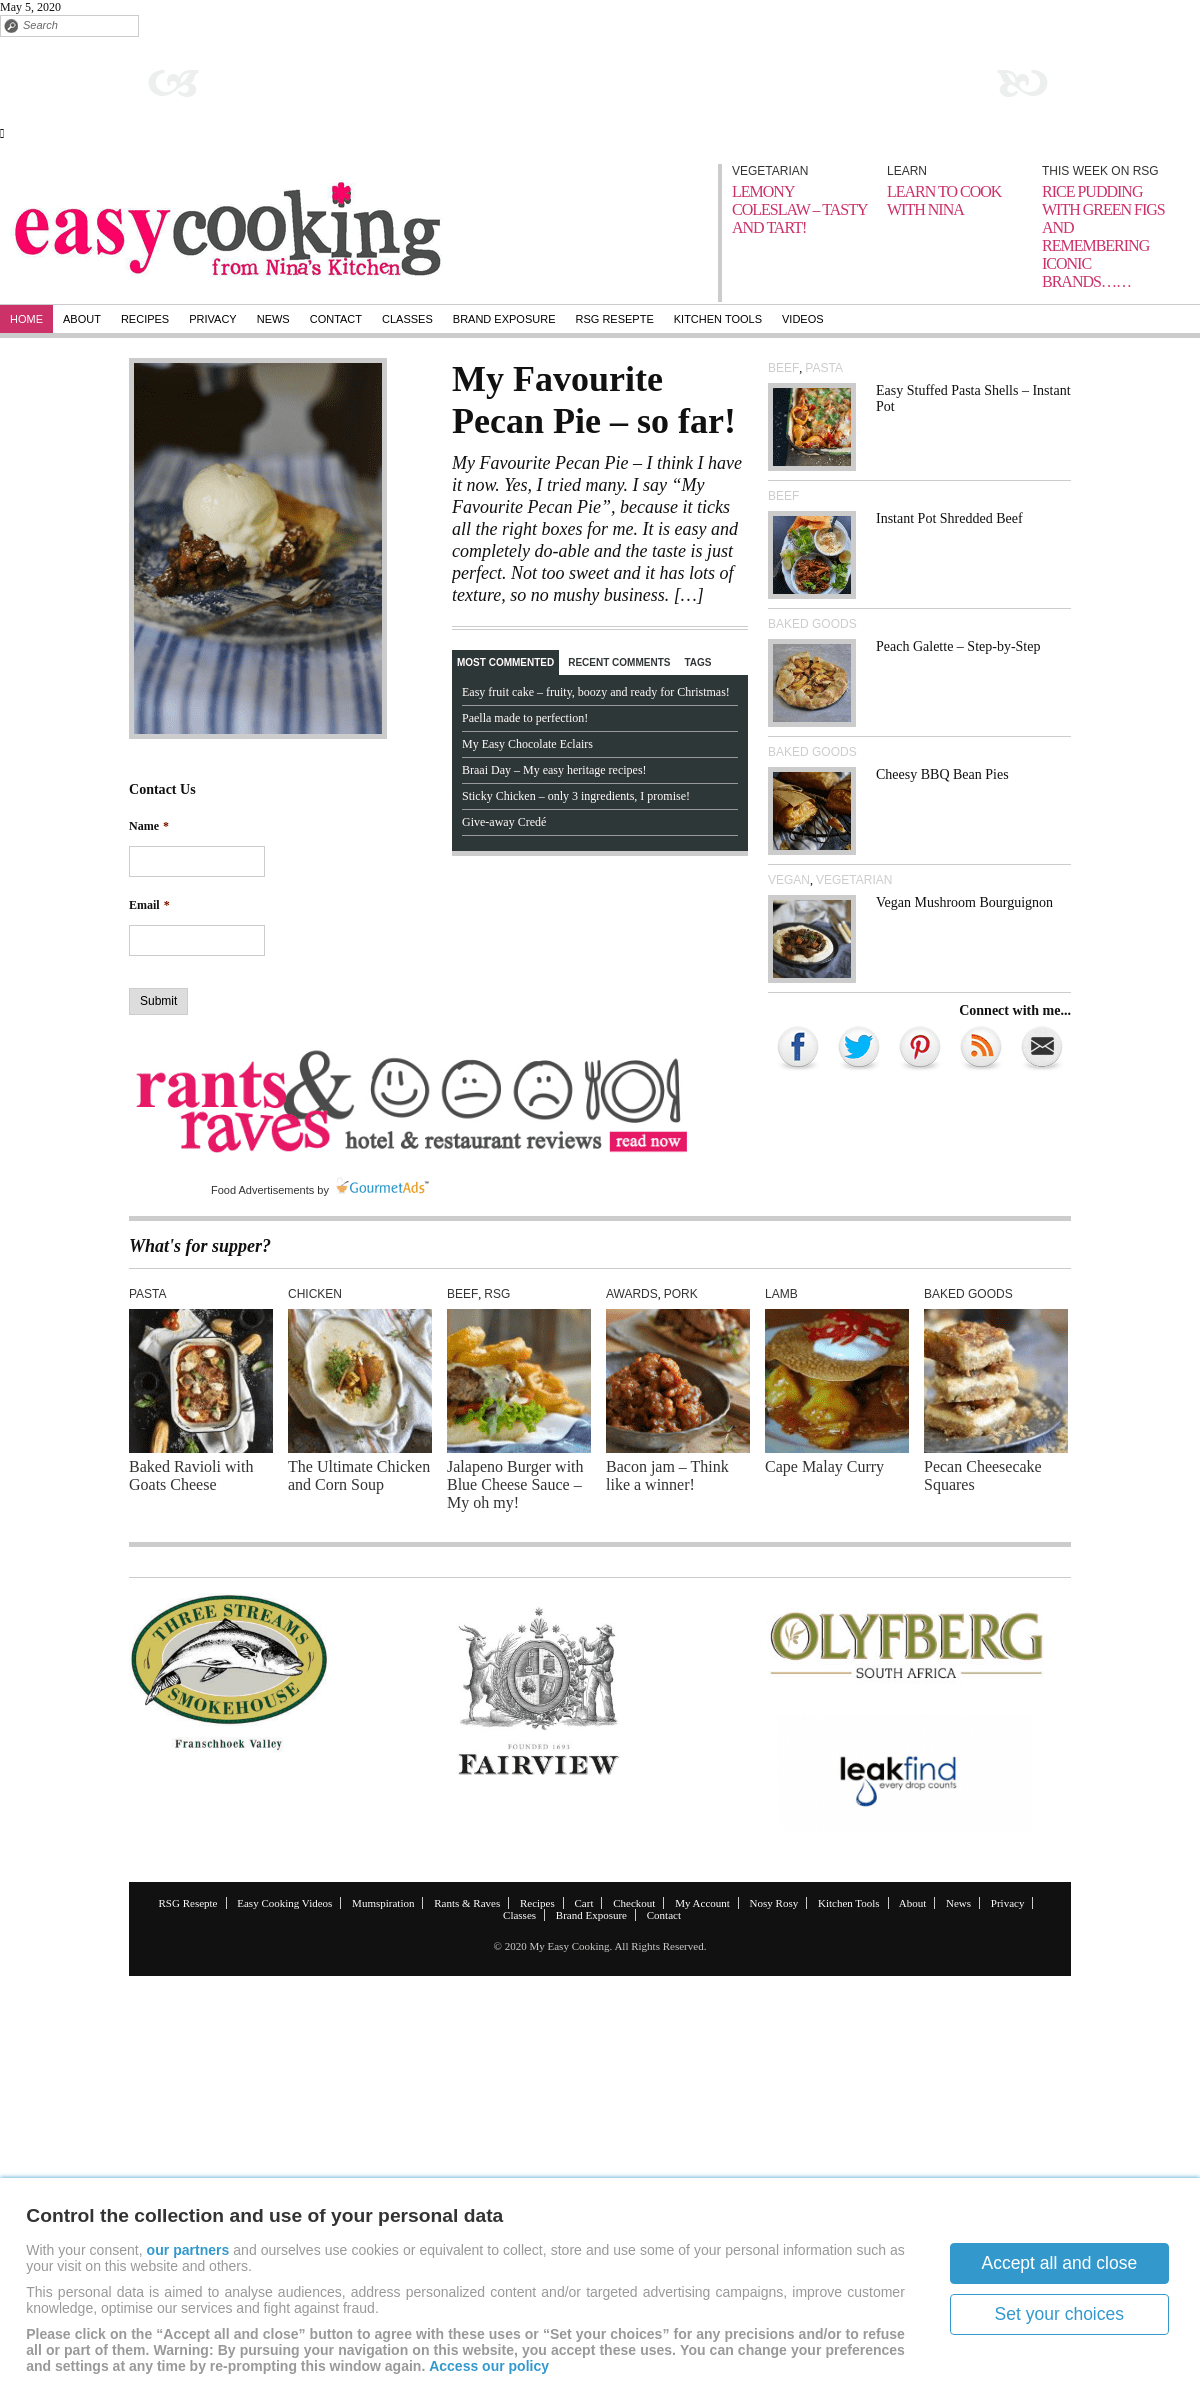 A complete backup of my-easy-cooking.com